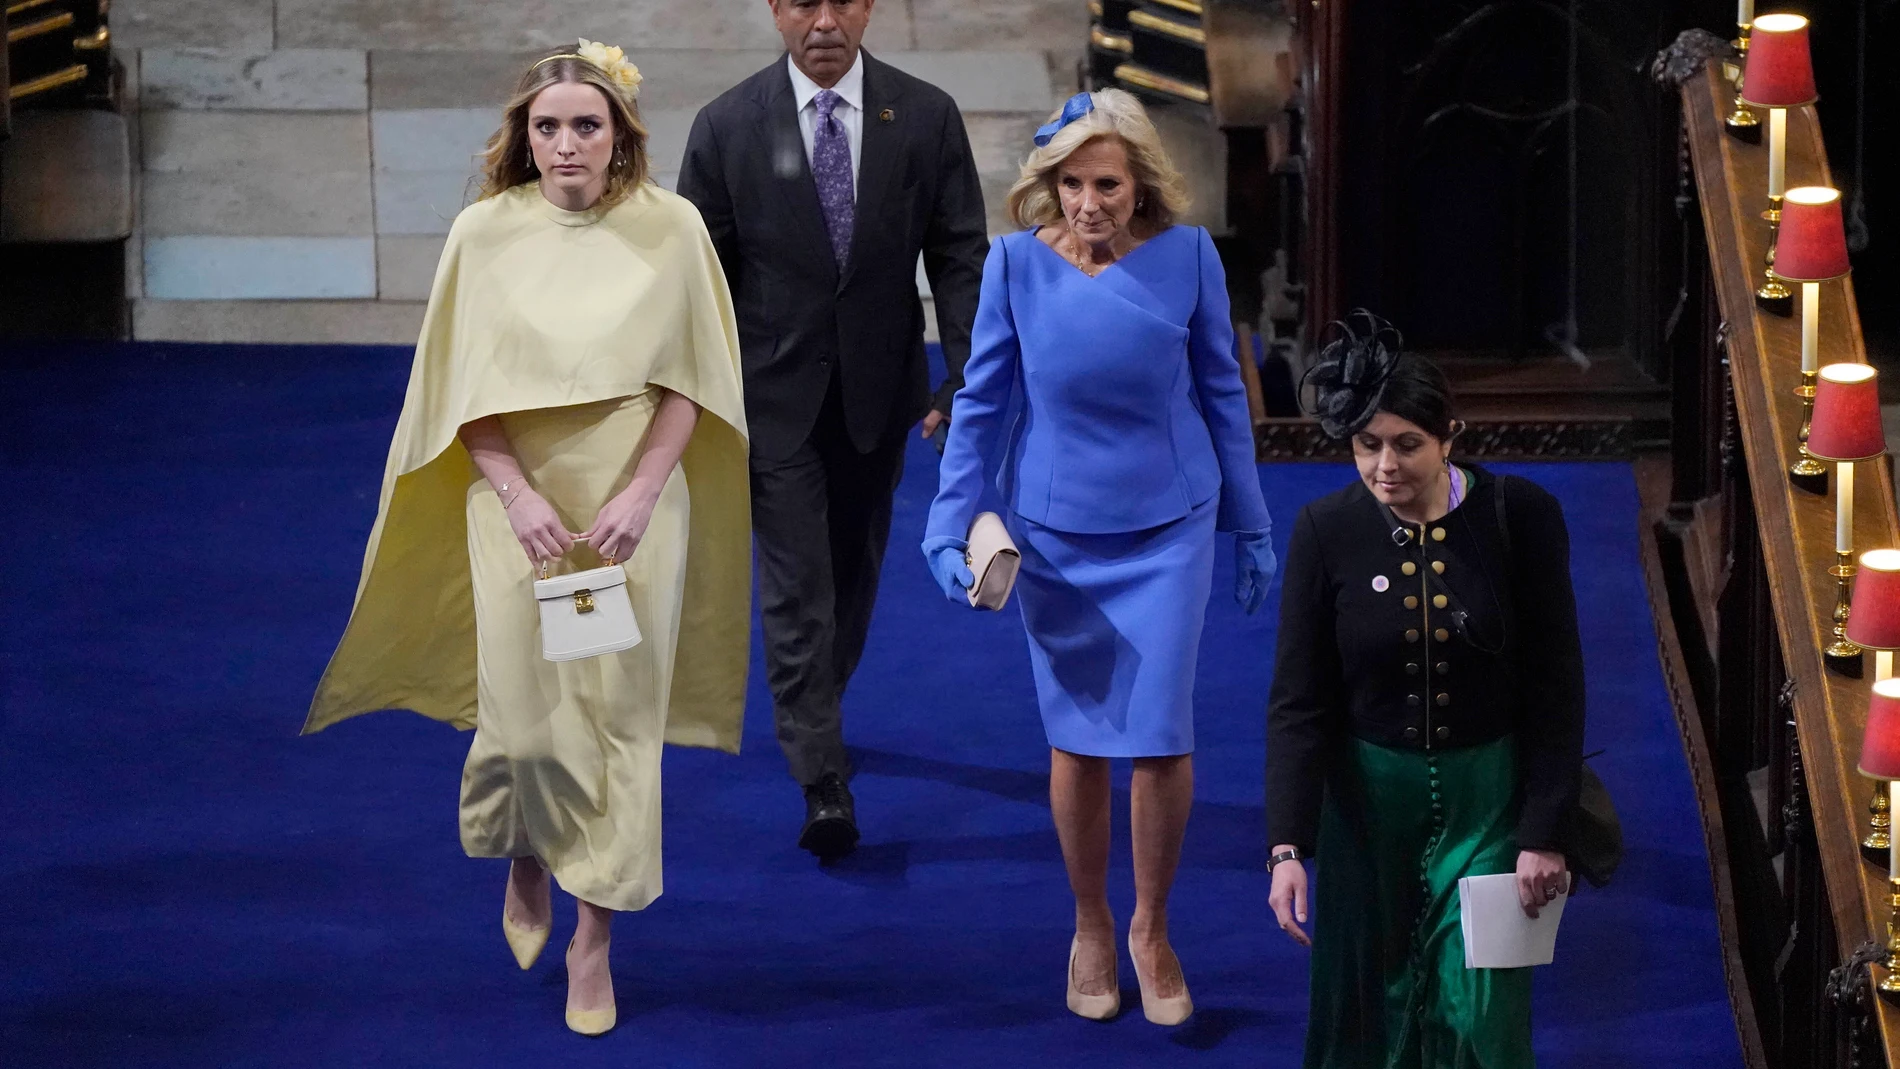 US First Lady Jill Biden, and her granddaughter Finnegan arrive at Westminster Abbey, ahead of the coronation of King Charles III and Camilla, the Queen Consort, in London, Saturday, May 6, 2023. (Andrew Matthews/Pool via AP)